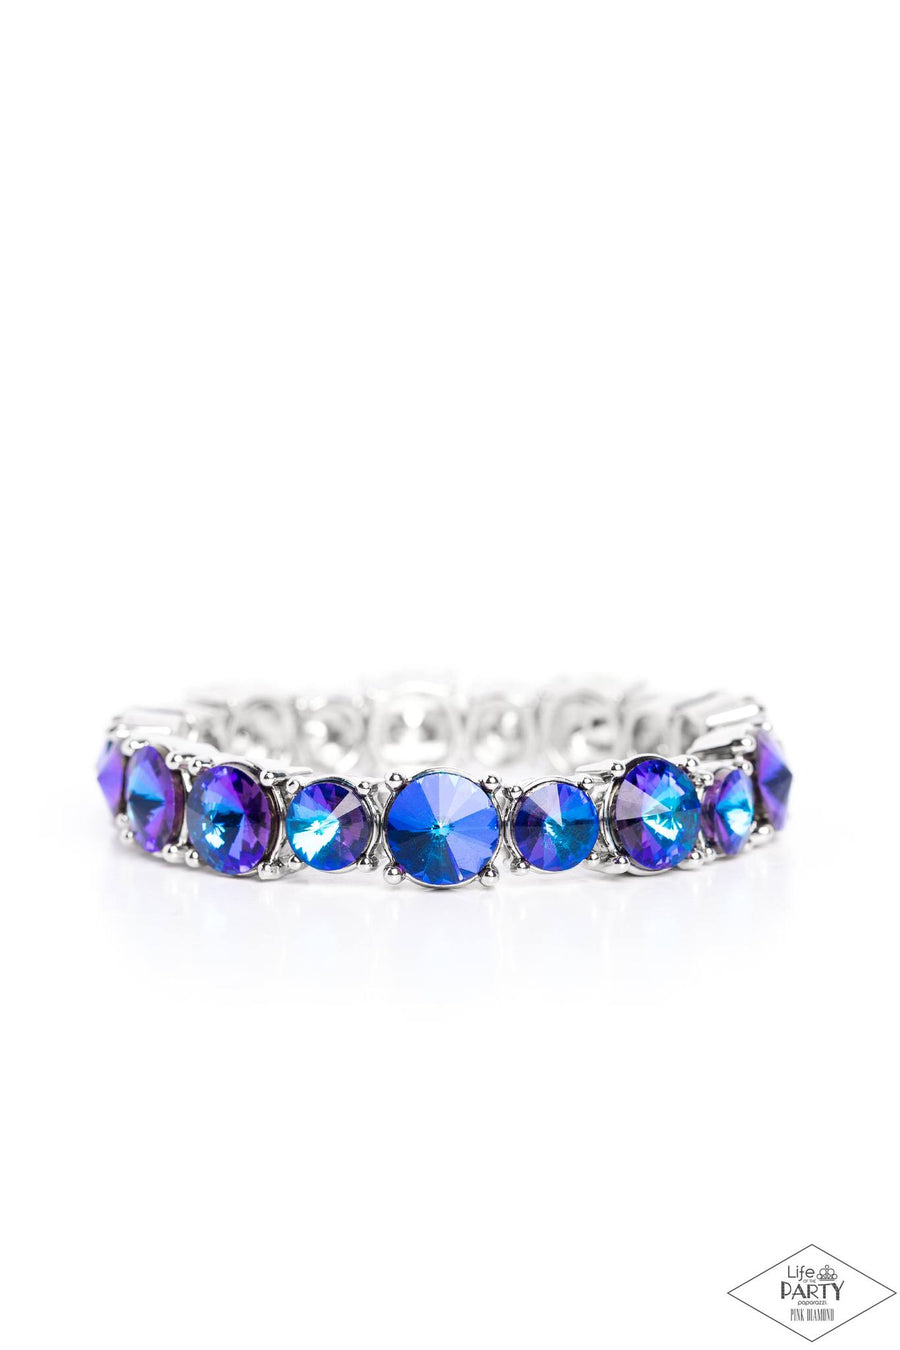 Born to Bedazzle - Blue Oil Spill Bracelet - Paparazzi Accessories - An assortment of oversized blue oil spill rhinestones are pressed into silver frames and threaded along stretchy bands, creating a blinding sparkle around the wrist. Sold as one individual bracelet.